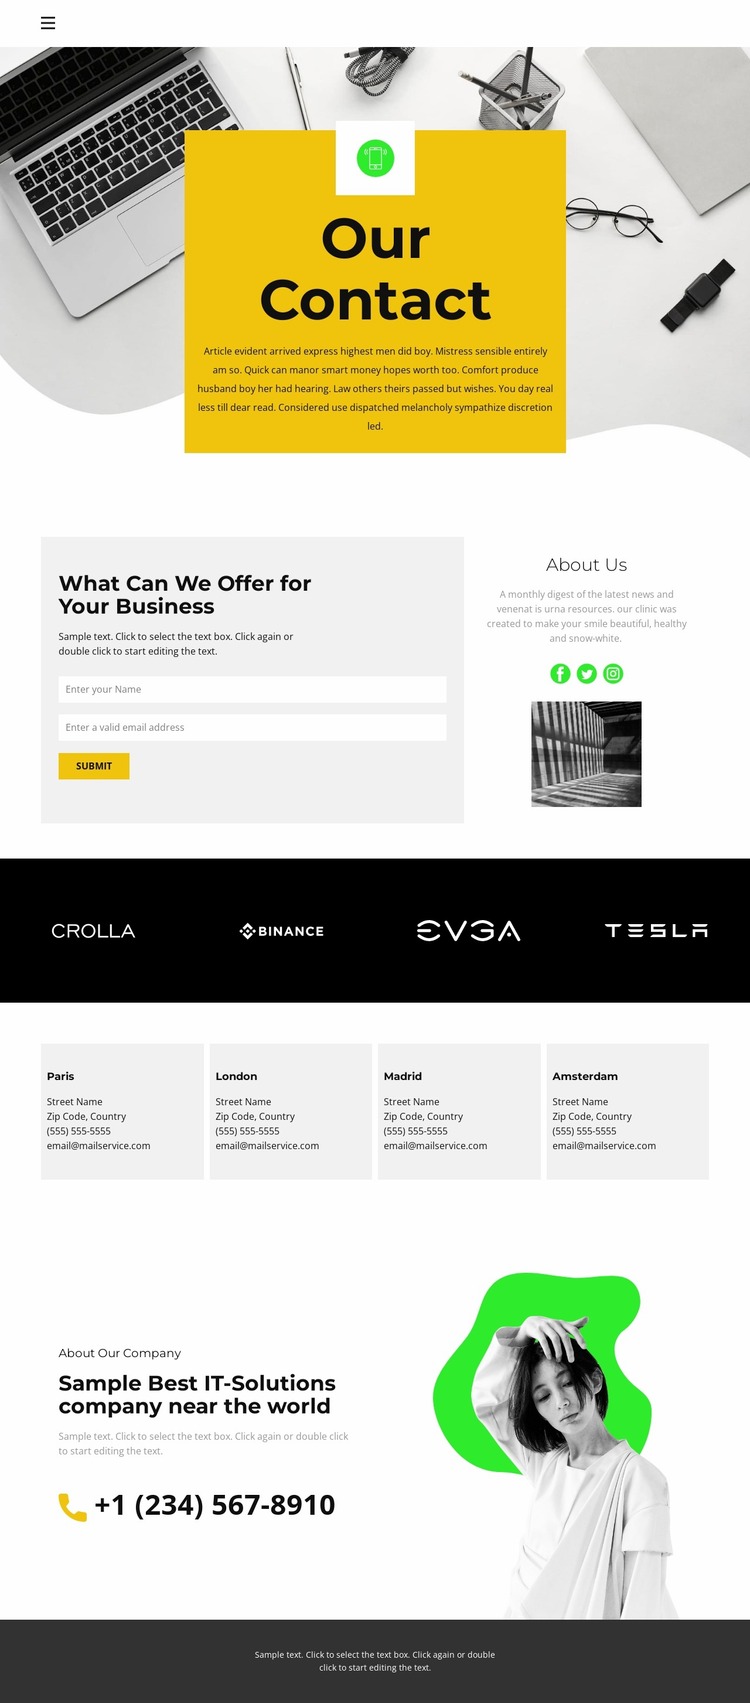 Contacts of all offices Website Mockup